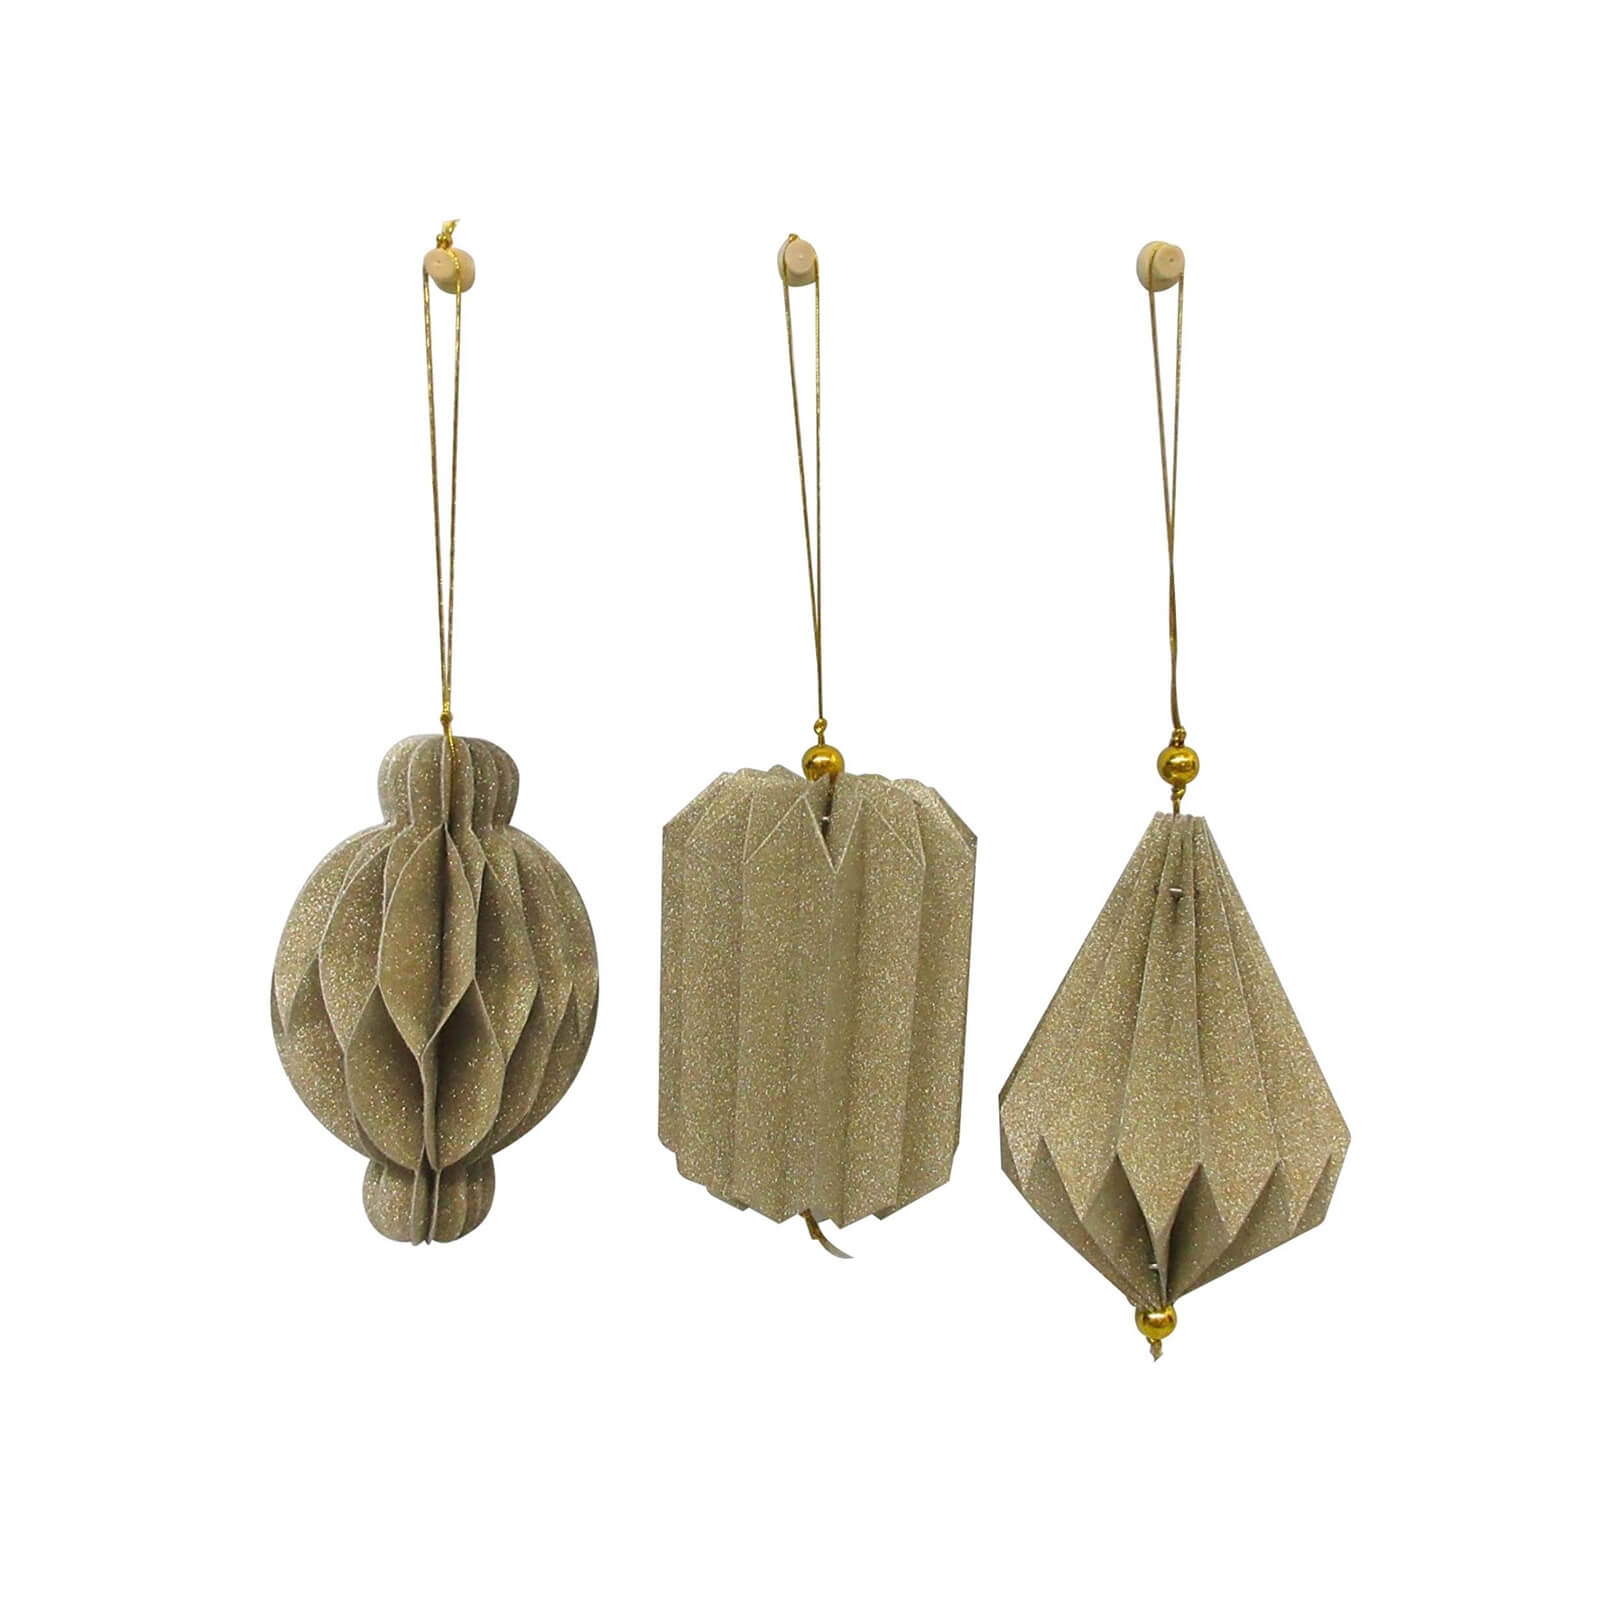 Pack of 3 Gold Concertina Tree Decorations - Large